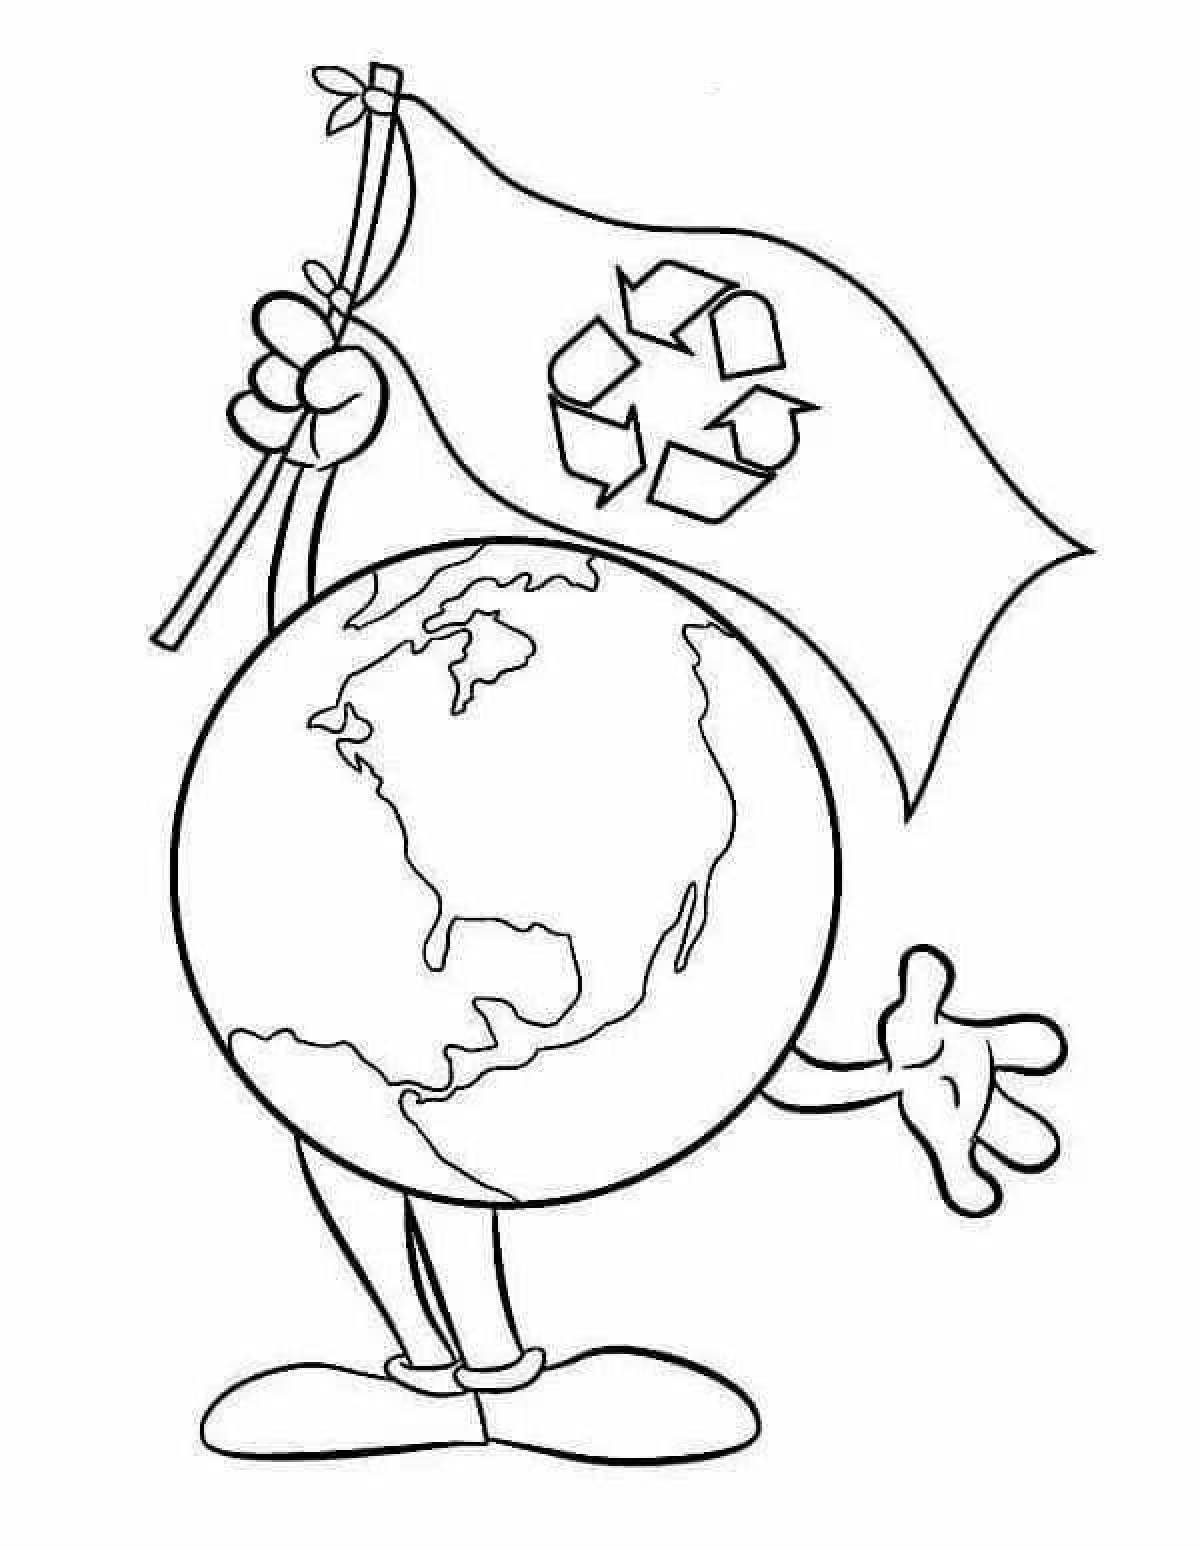 Inspirational eco coloring book